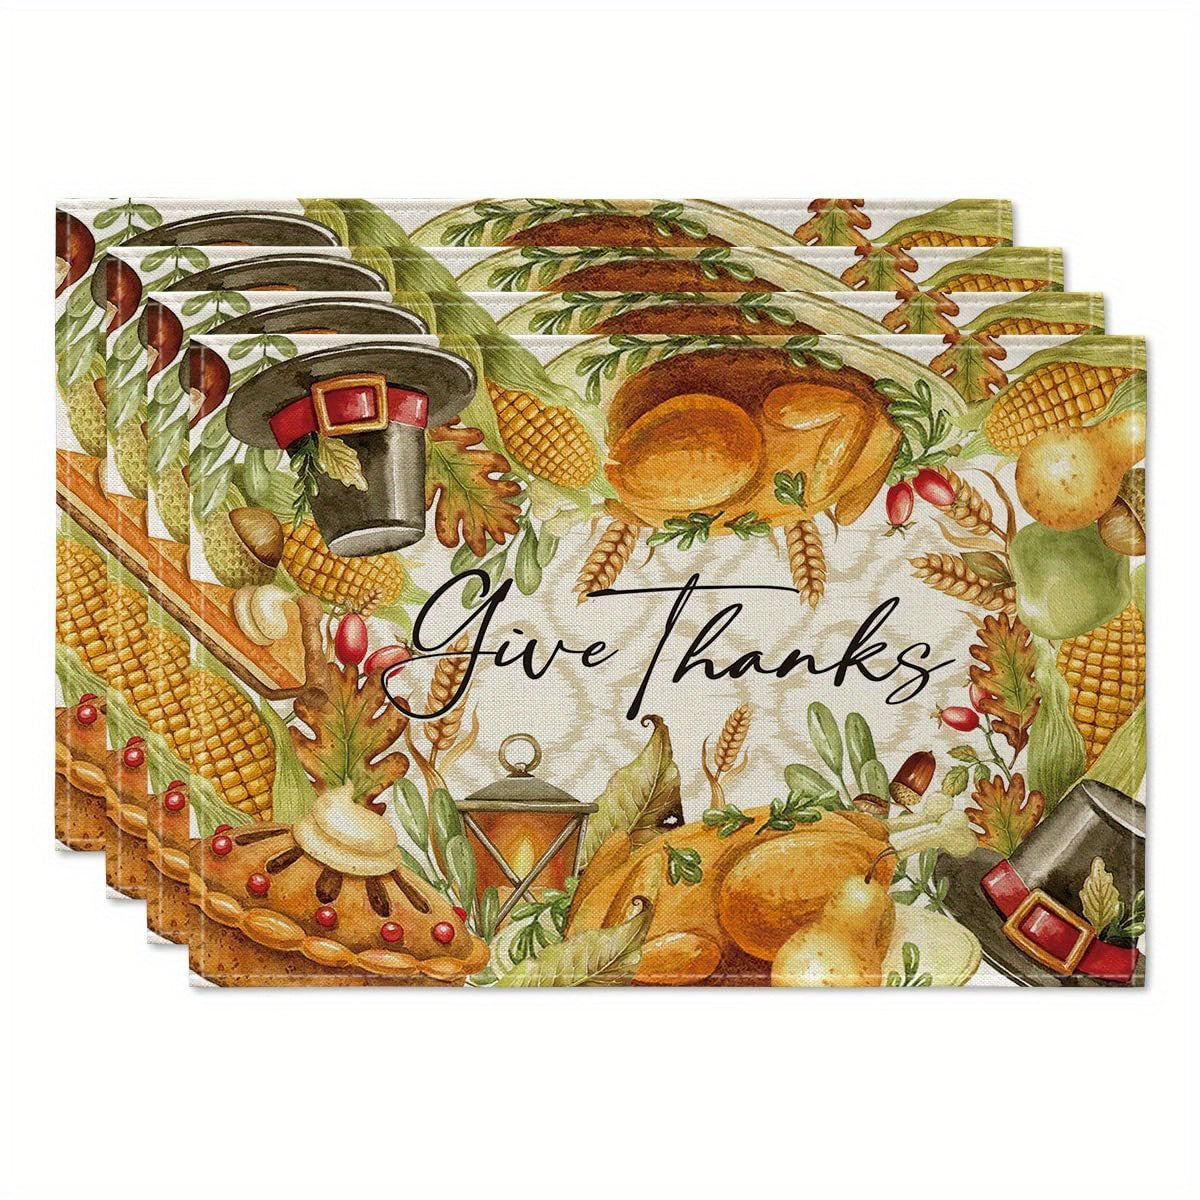 Give Thanks (Thanksgiving themed) Placemats Christian Table Placemat 12.6 In*16.5 In claimedbygoddesigns